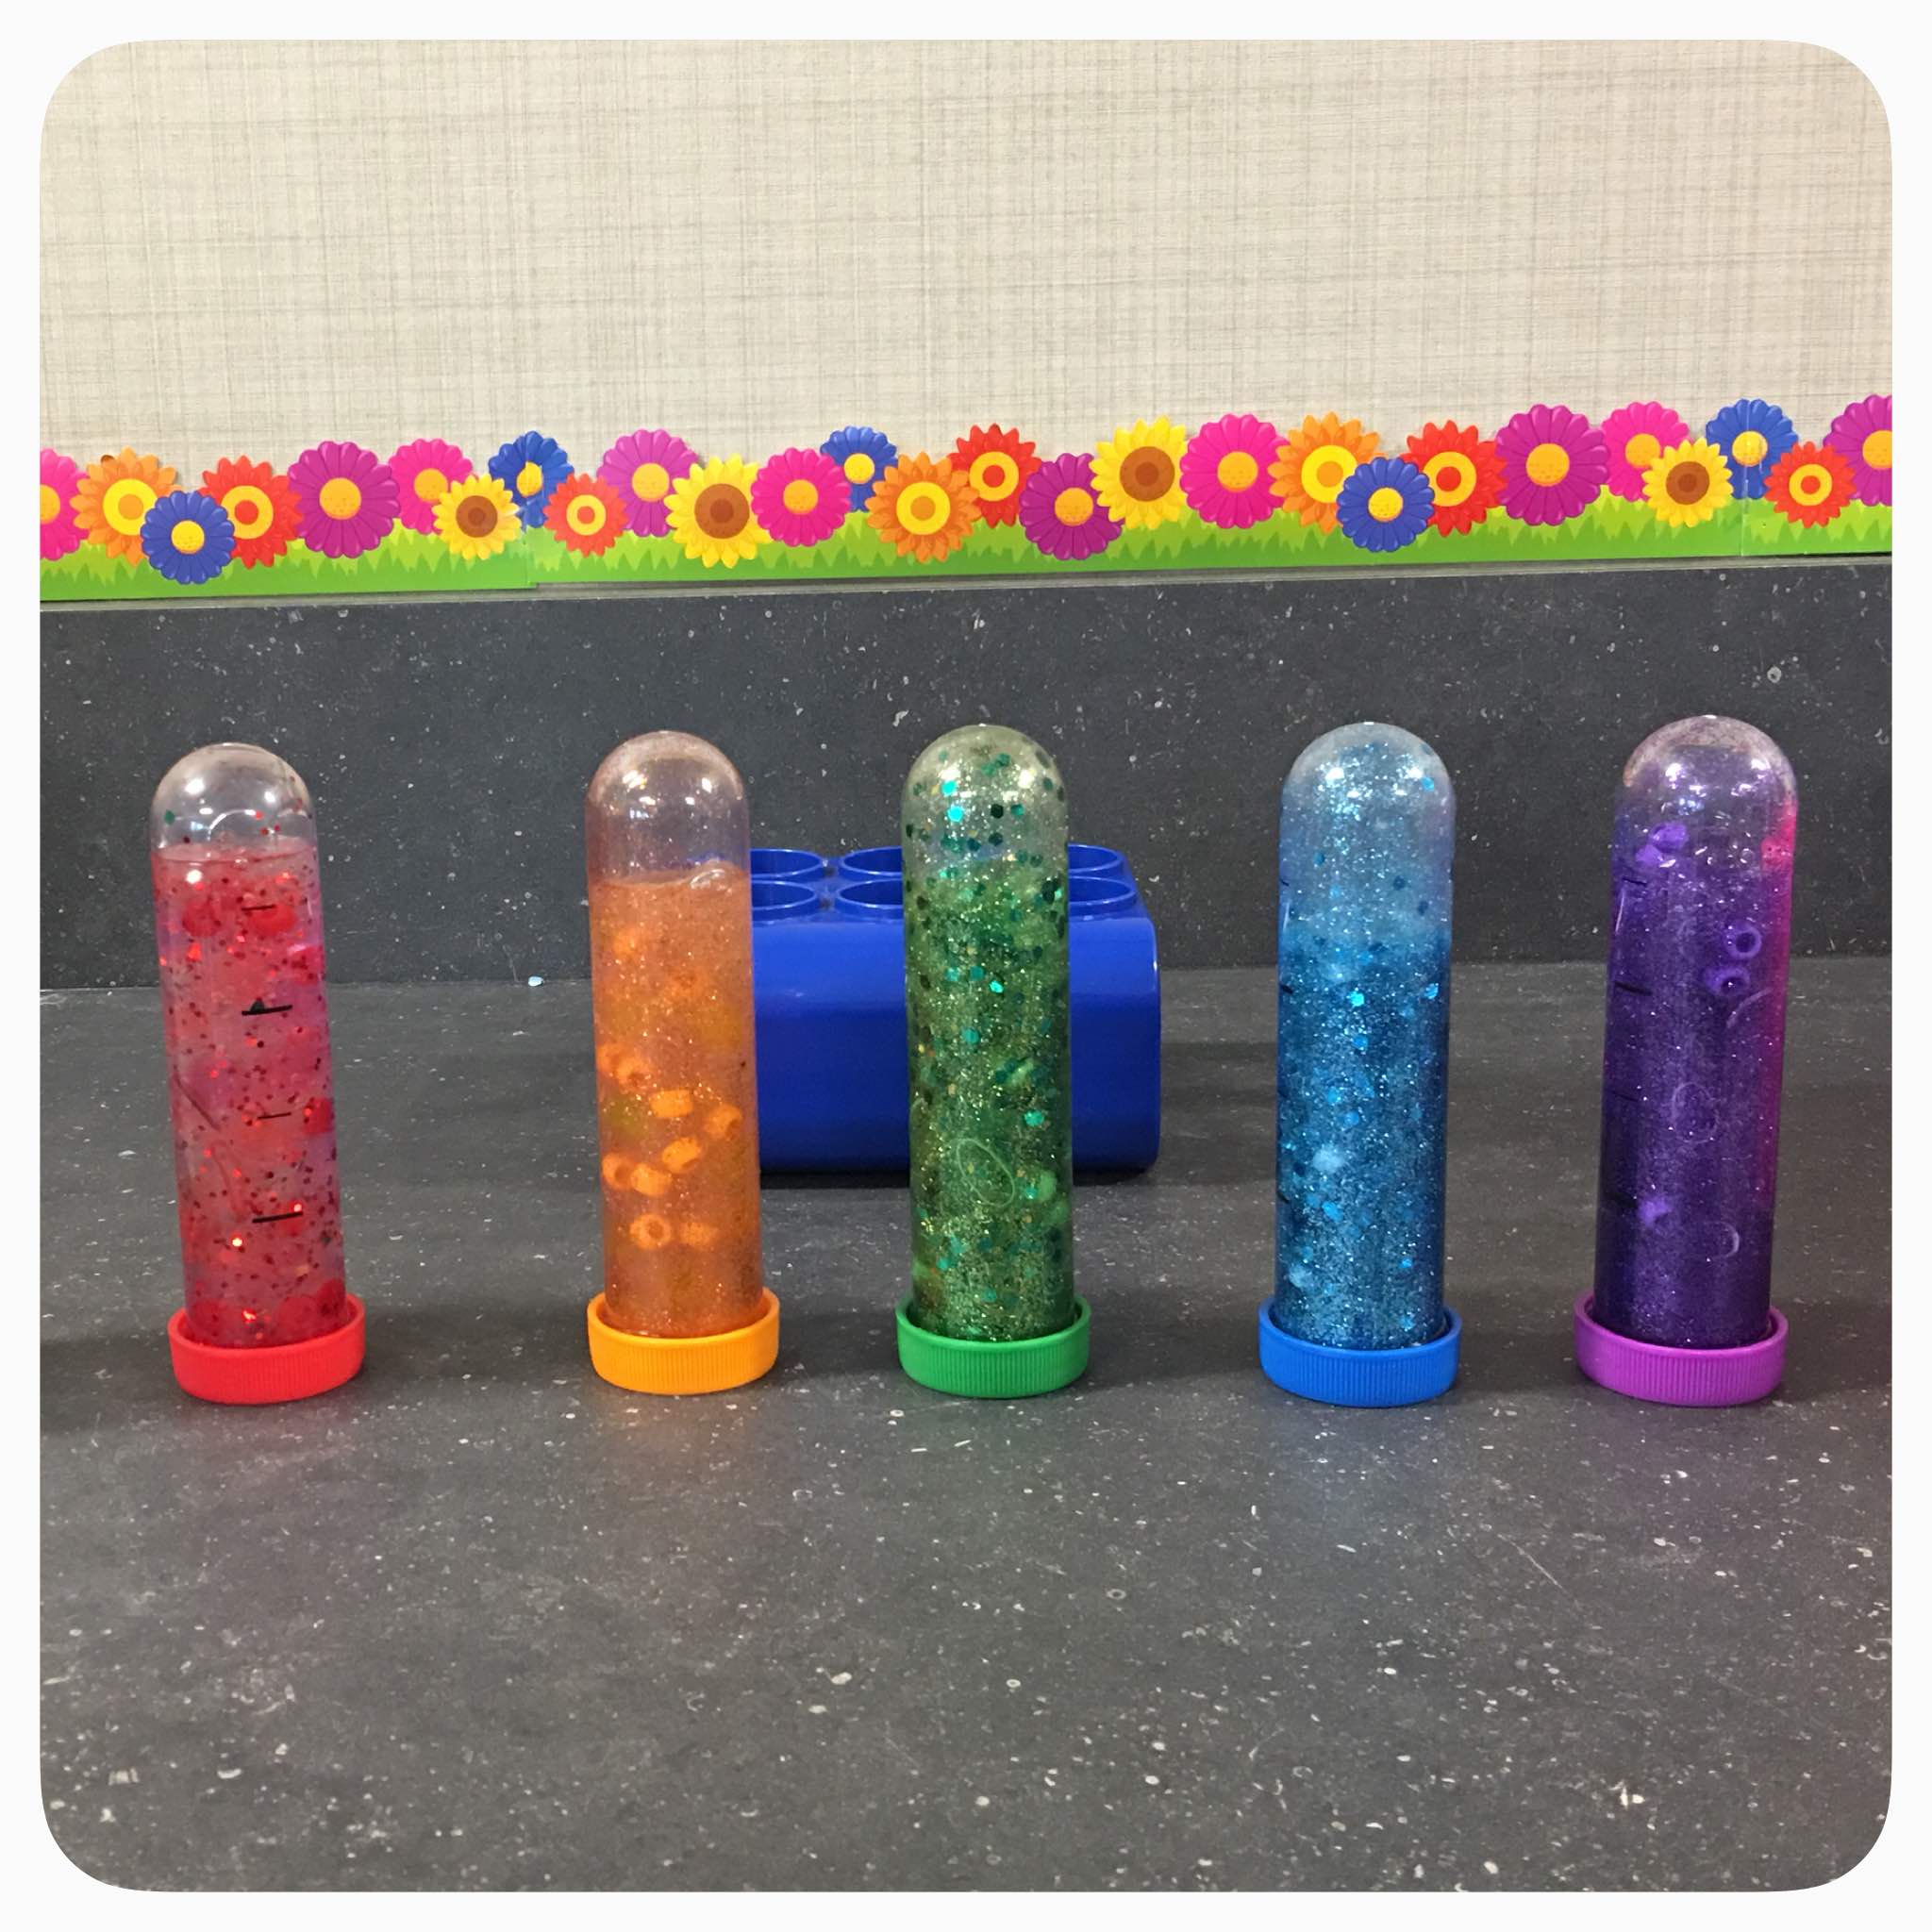 Rainbow Sensory Bottles: these calm down jars are mesmerizing and full of color. Great way sensory play activity for babies, to teach toddlers and preschools about colors, and to just enjoy seeing a rainbow every day.